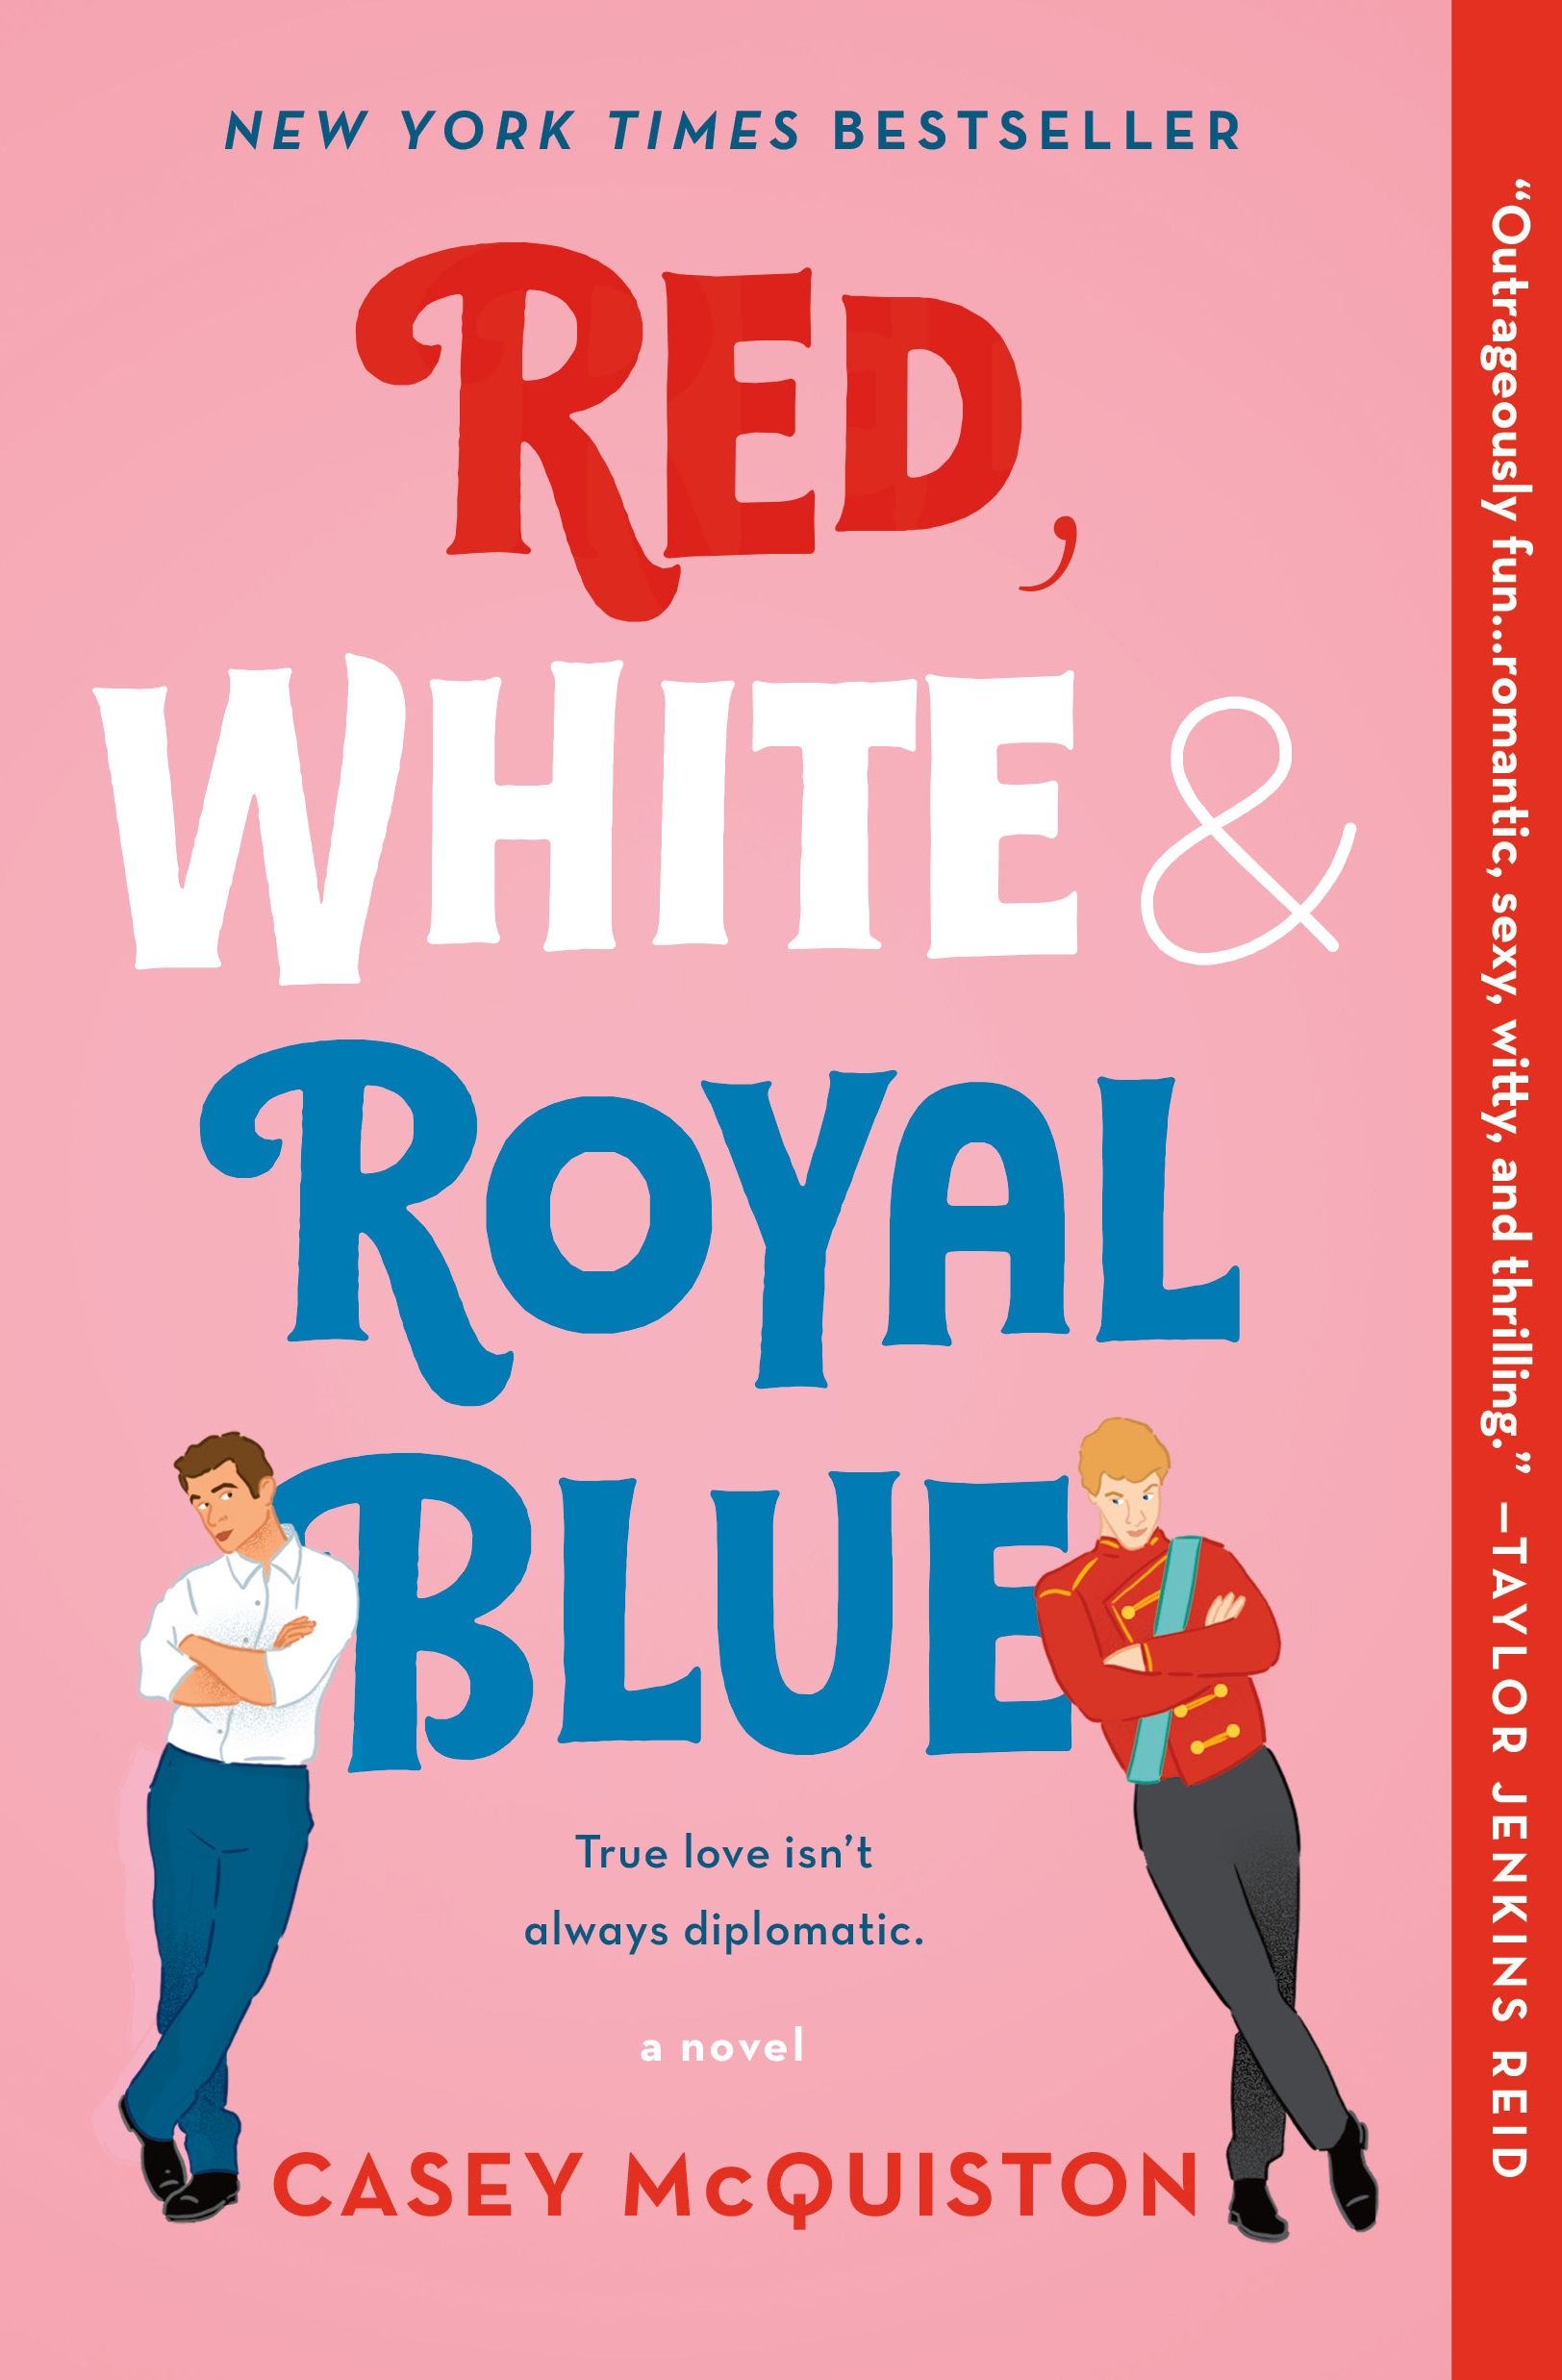 Book “Red, White & Royal Blue” by Casey McQuiston